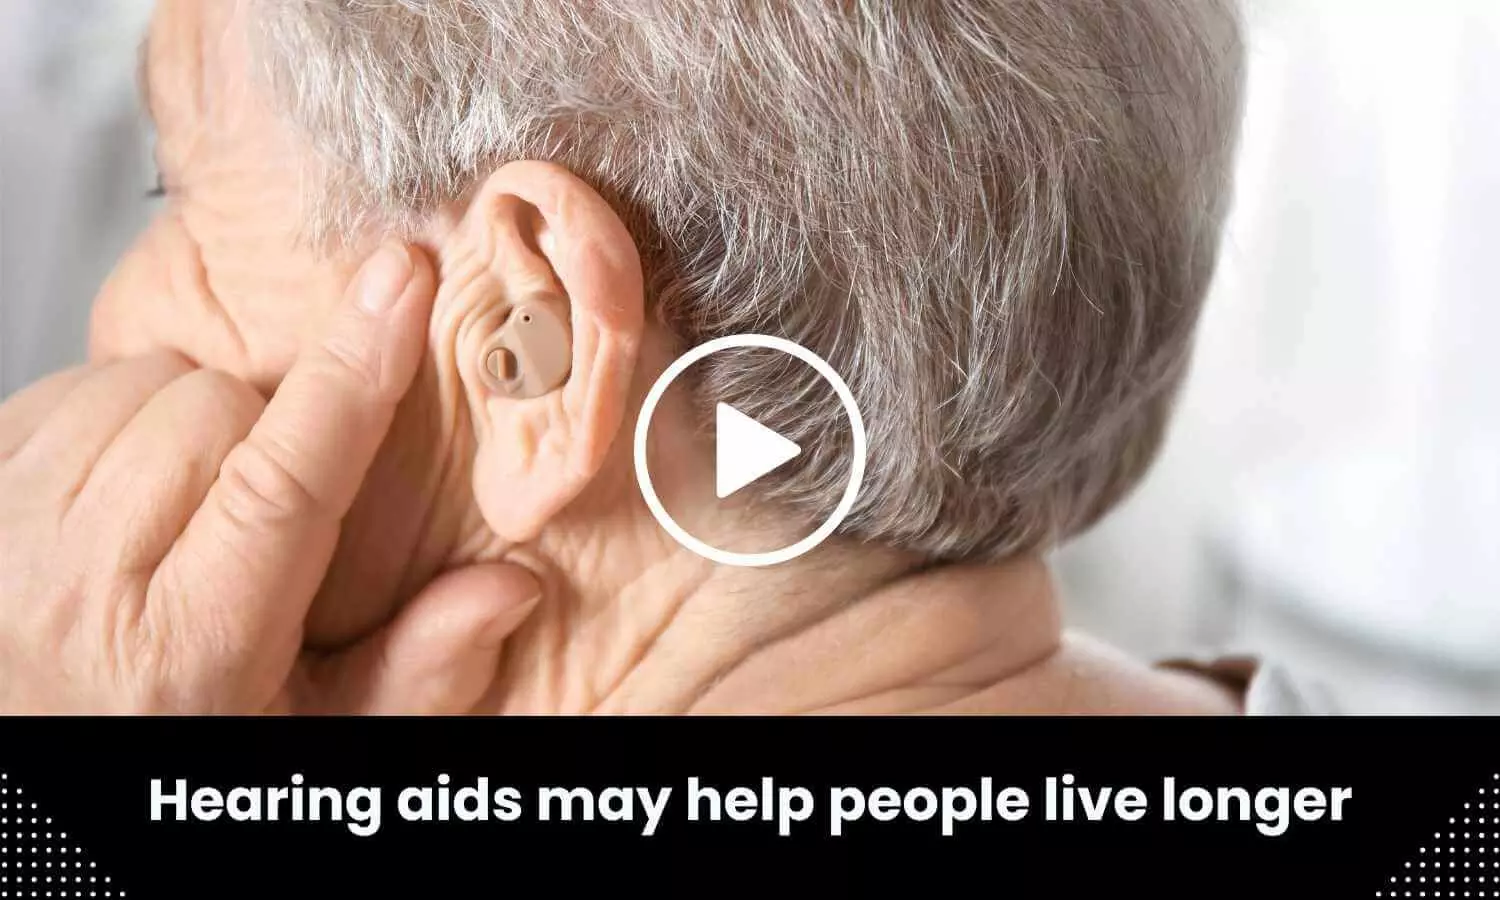 Hearing aids may help people live longer